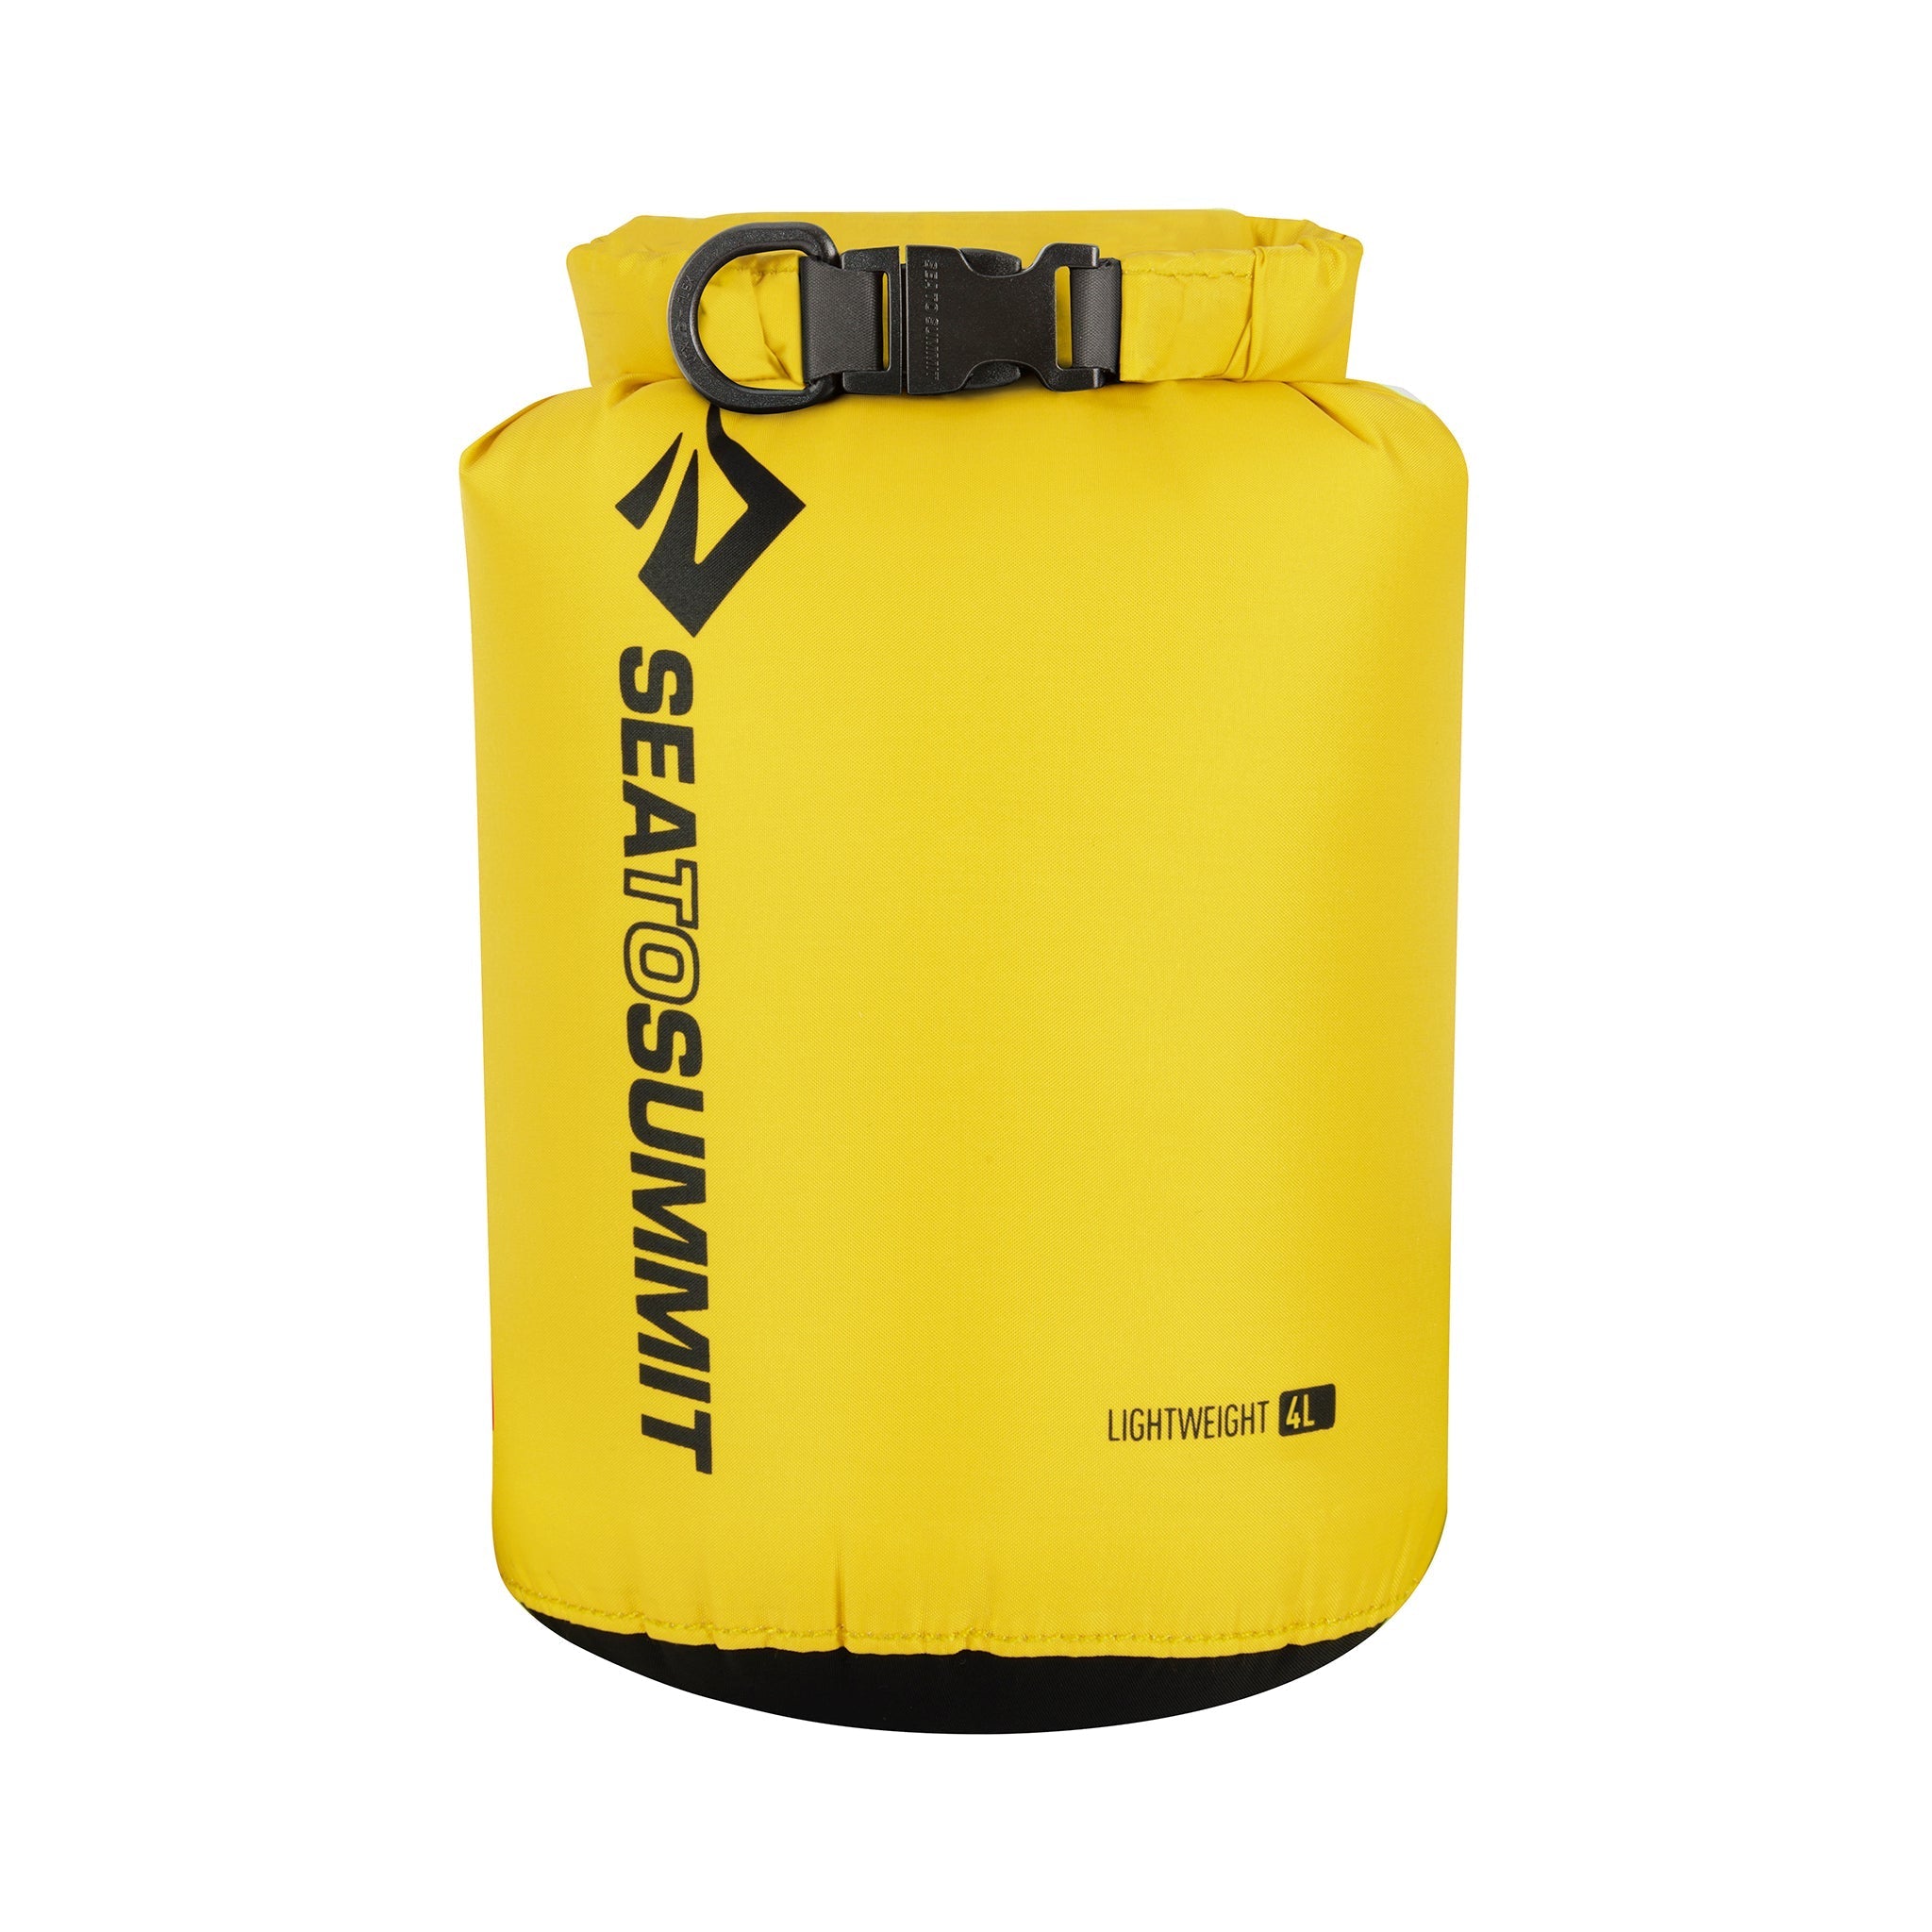 4 litre || Lightweight Dry Sack in Yellow